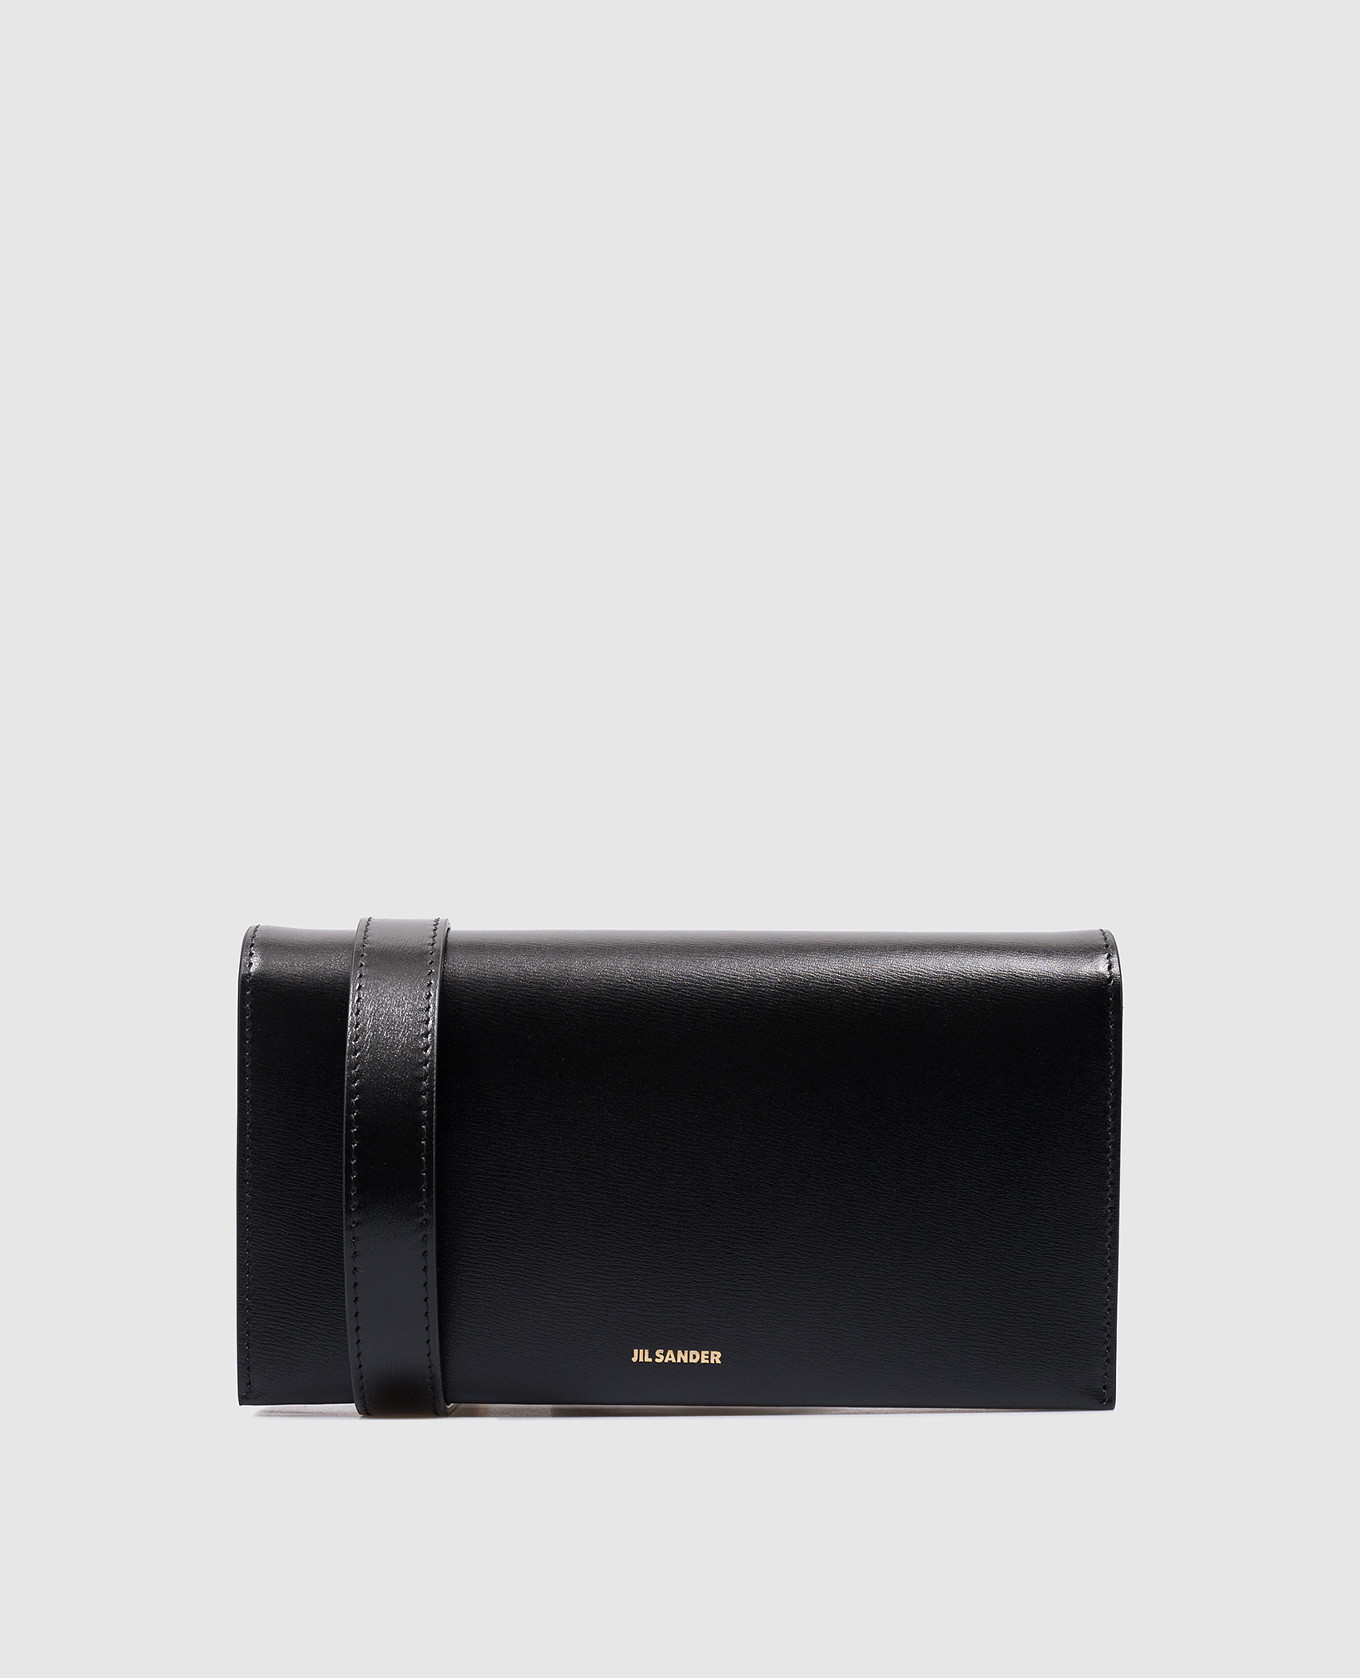 Black leather clutch with logo